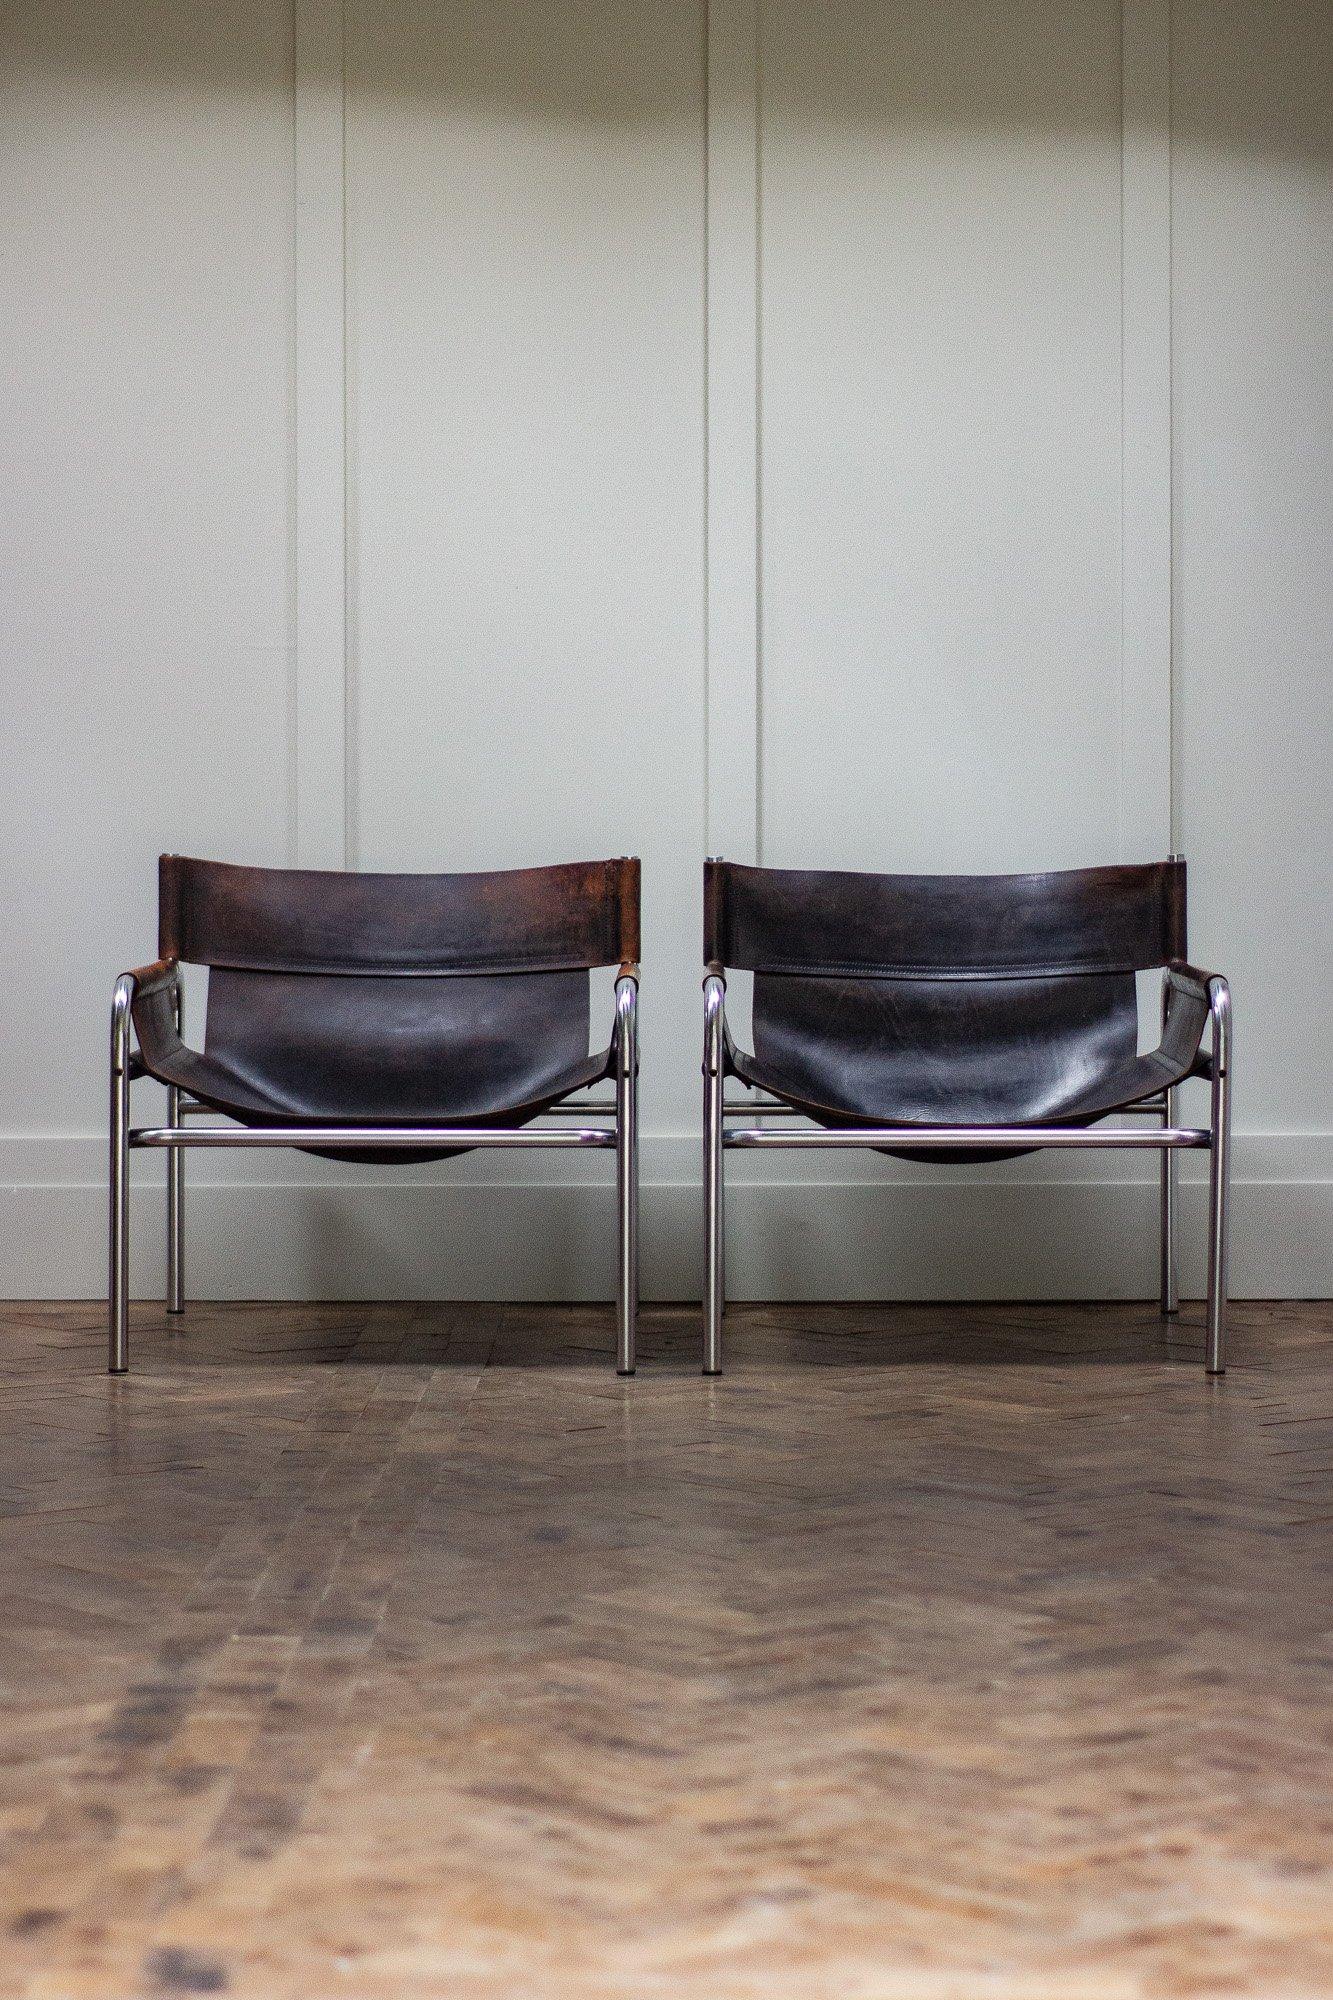 Pair tubular chrome and leather chairs designed by Walter Antonis for Dutch company t'Spectrum in the 1970s.

Price is for the pair.

Measures: Height 66cm

Seat height 30cm

Width 68cm

Depth 75cm.